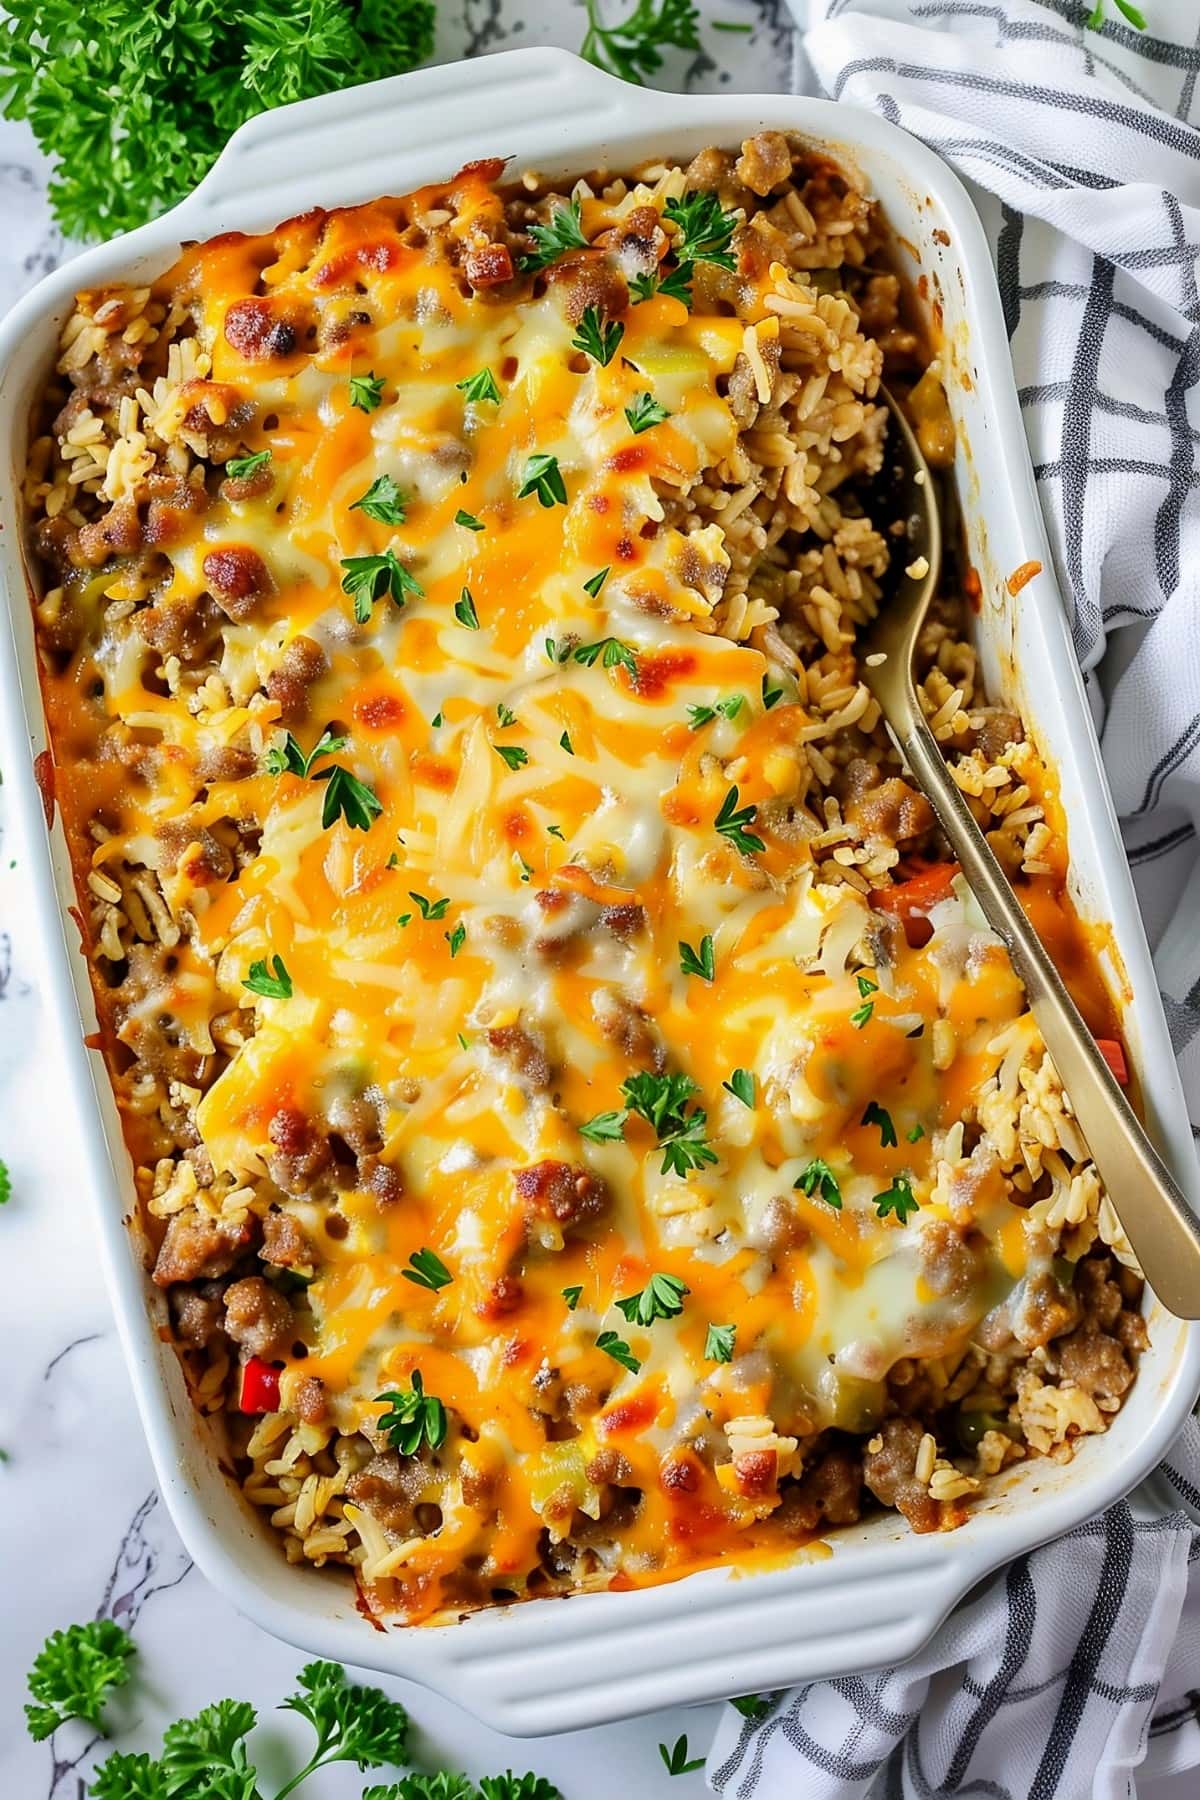 Savory homemade sausage and rice casserole with colorful vegetables